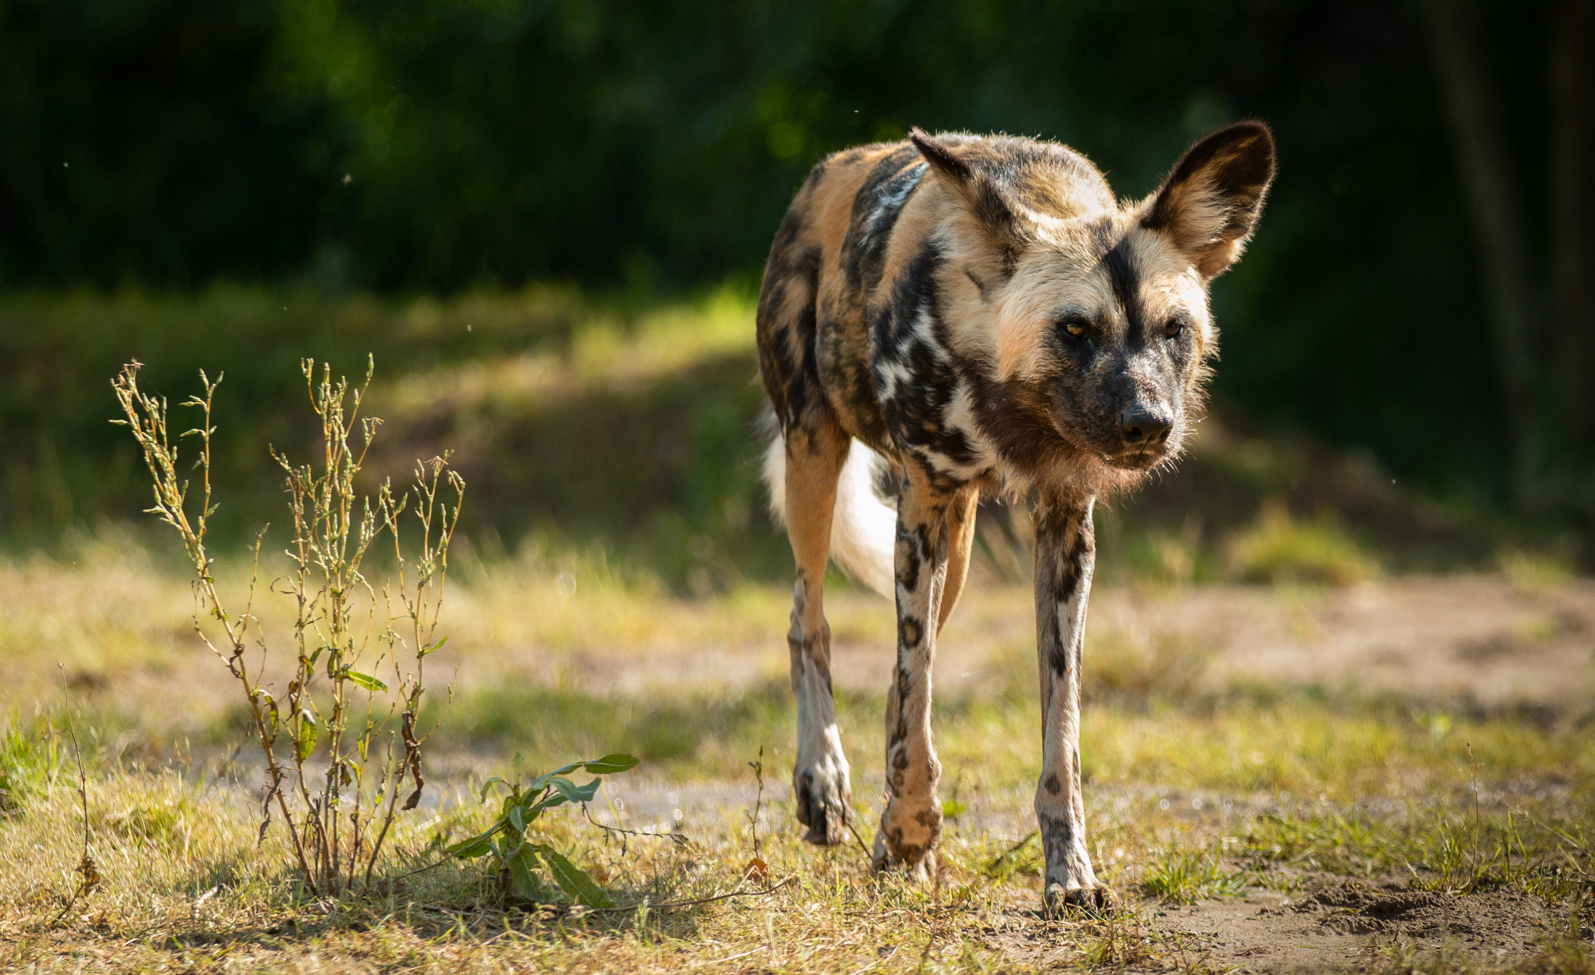 African Painted Dog at Chester Zoo, by Matthew Polke